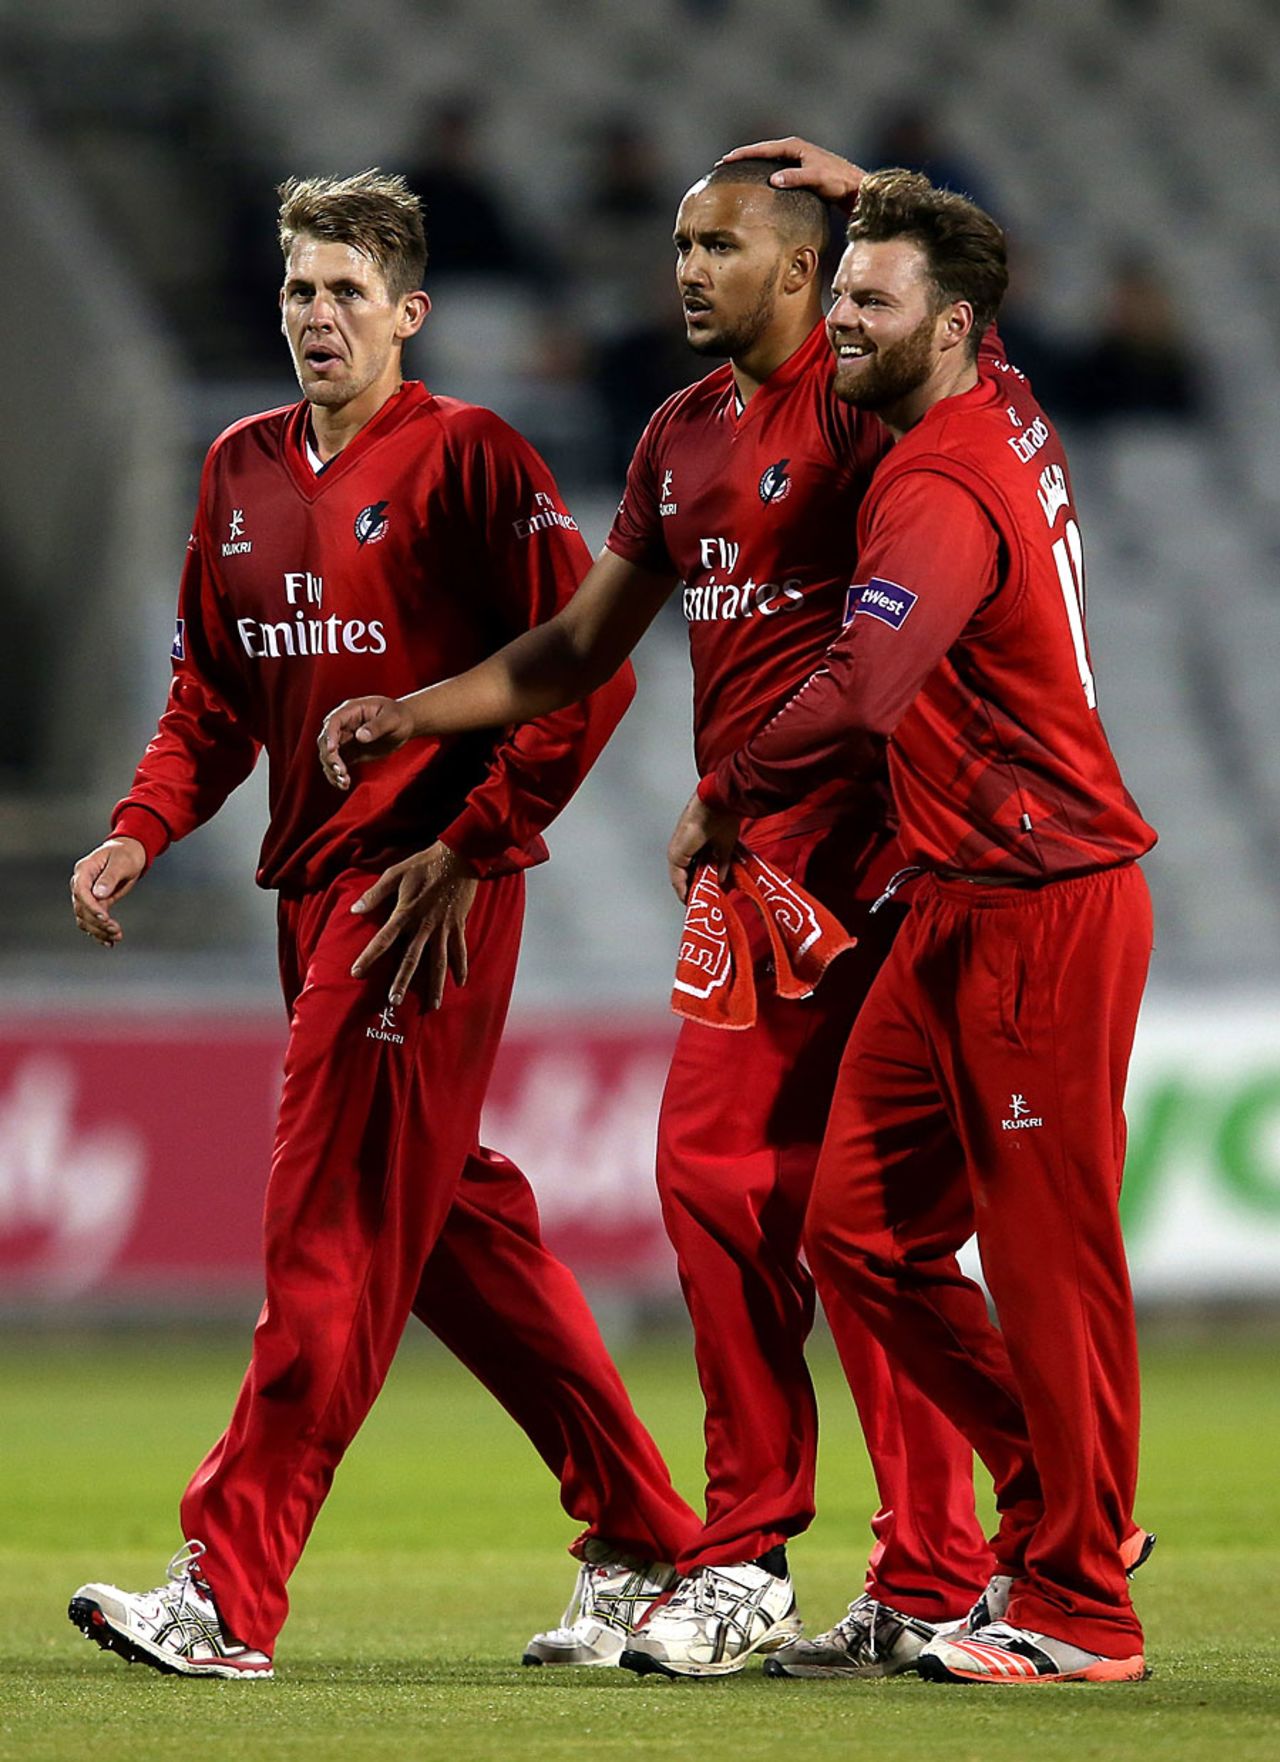 George Edwards (centre) took four wickets on his first appearance for Lancashire, Lancashire v Leicestershire, NatWest Blast, North Group, Old Trafford, May 15, 2015